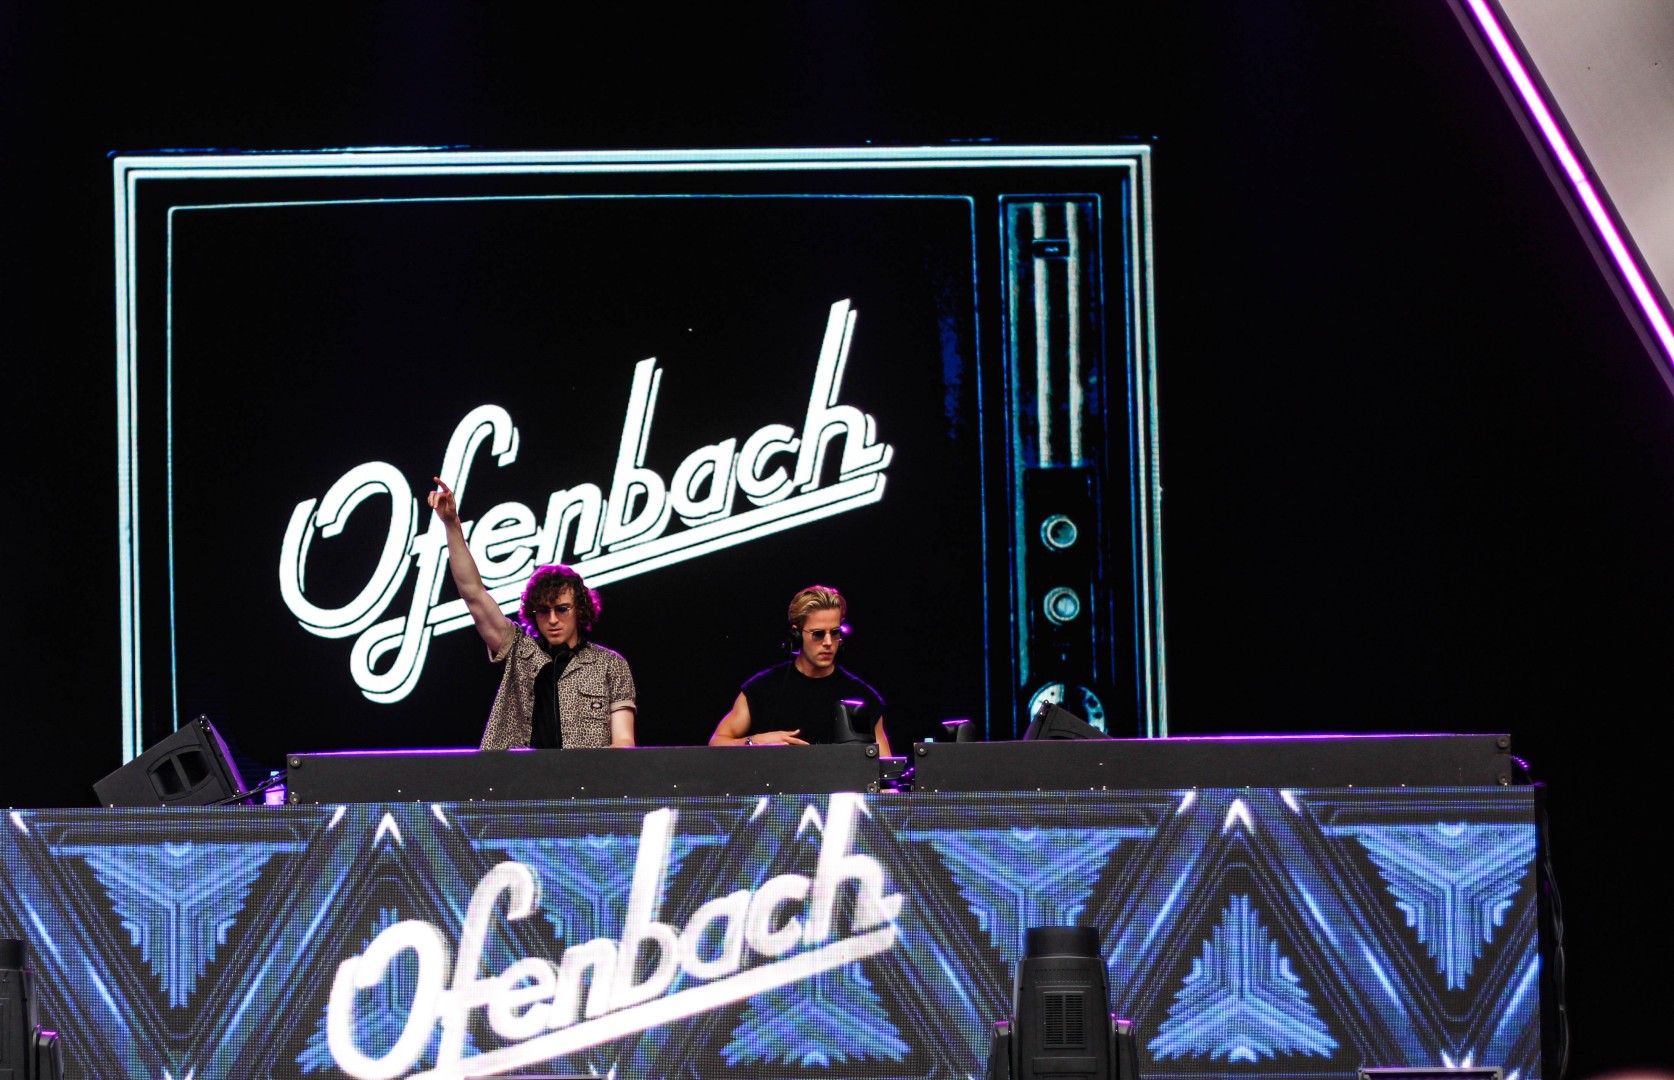 Ofenbach at Arena Nationala in Bucharest on June 3, 2022 (c499a6cf04)